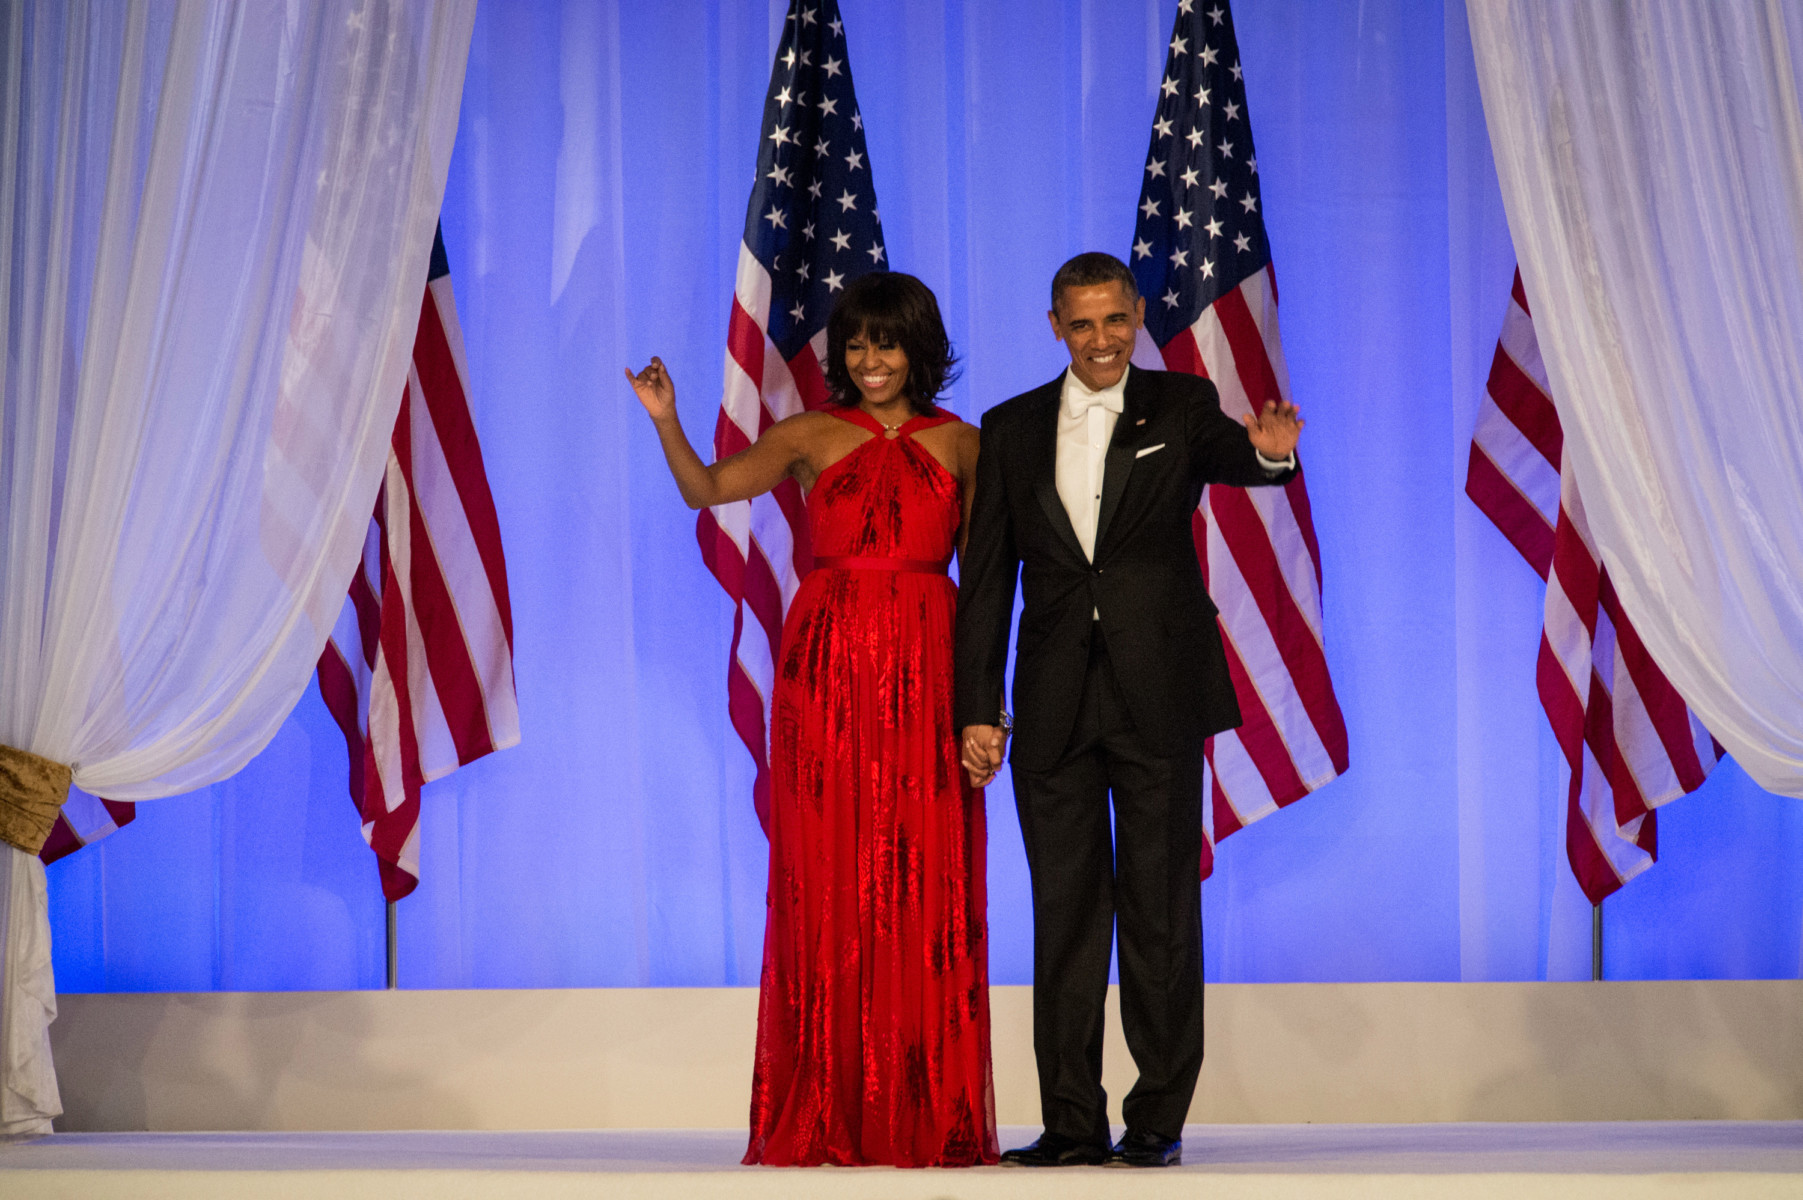 The former First Lady wore this elegant Jason Wu gown for the presidential inaugural ball in 2013 for her husband's second term in office